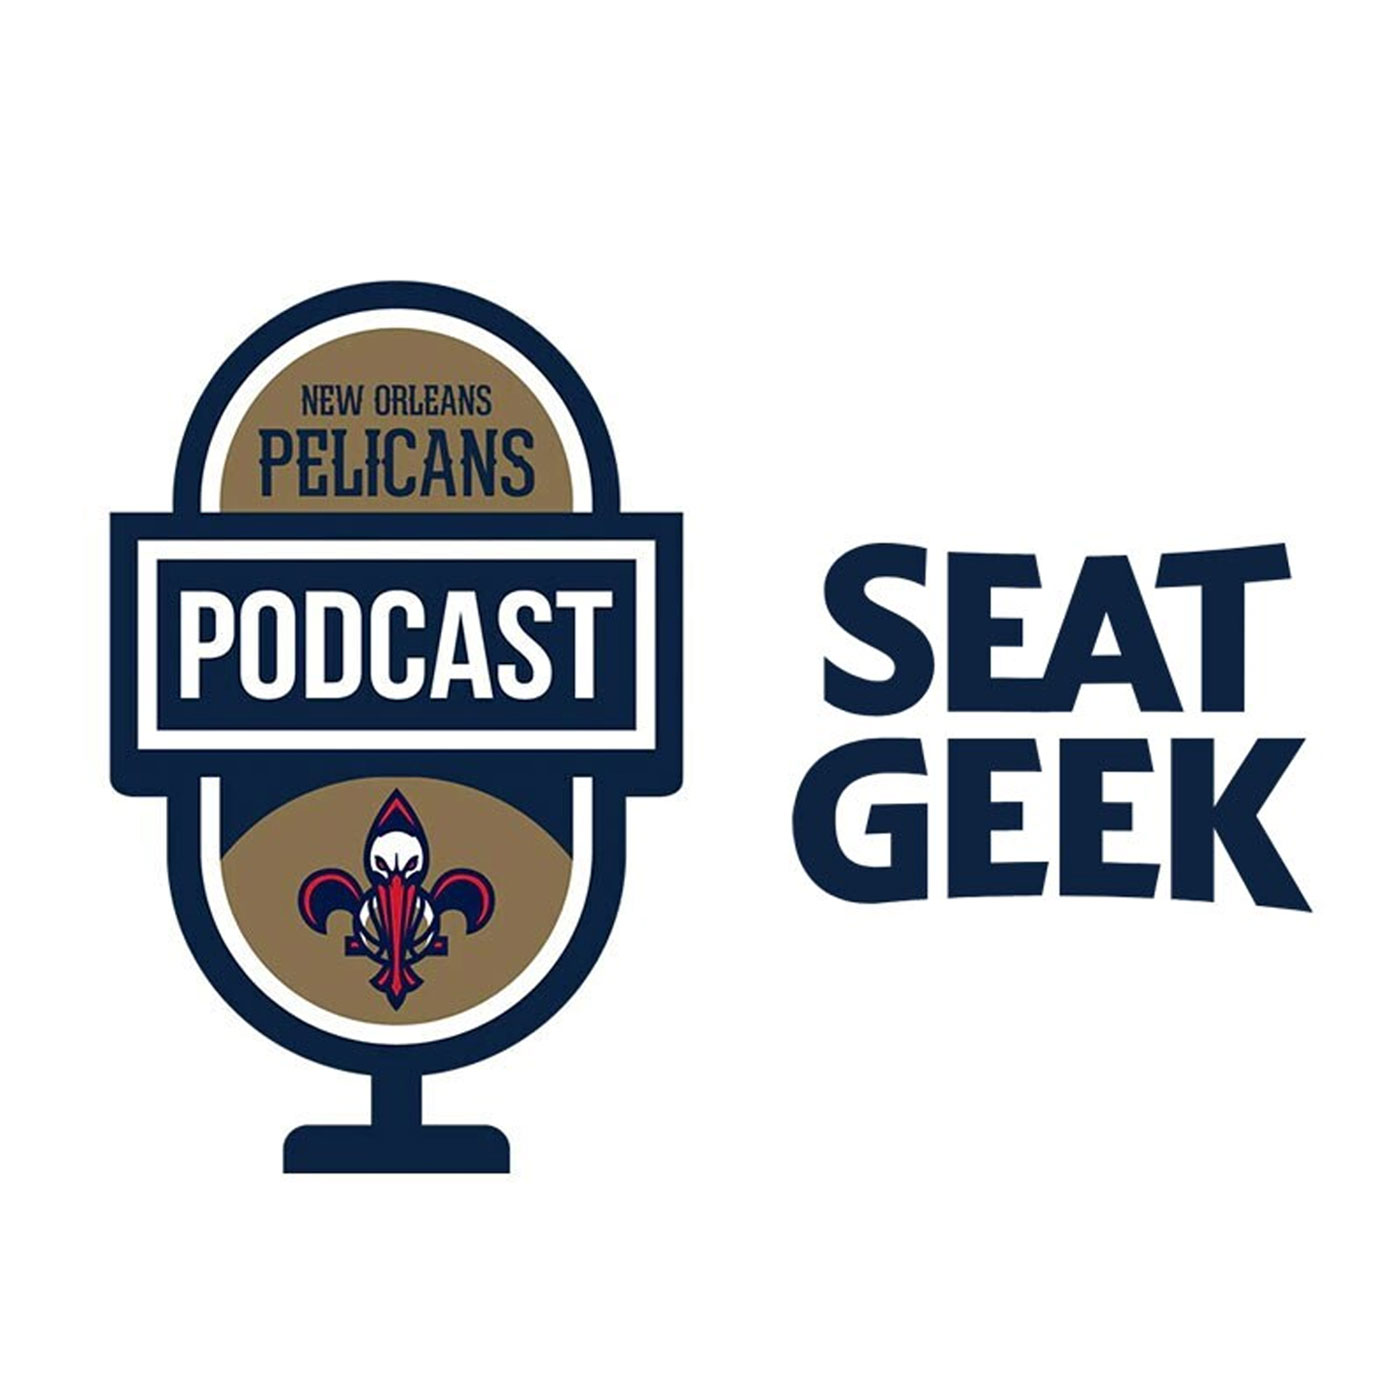 John Schuhmann on the New Orleans Pelicans Podcast presented by SeatGeek - January 14, 2022